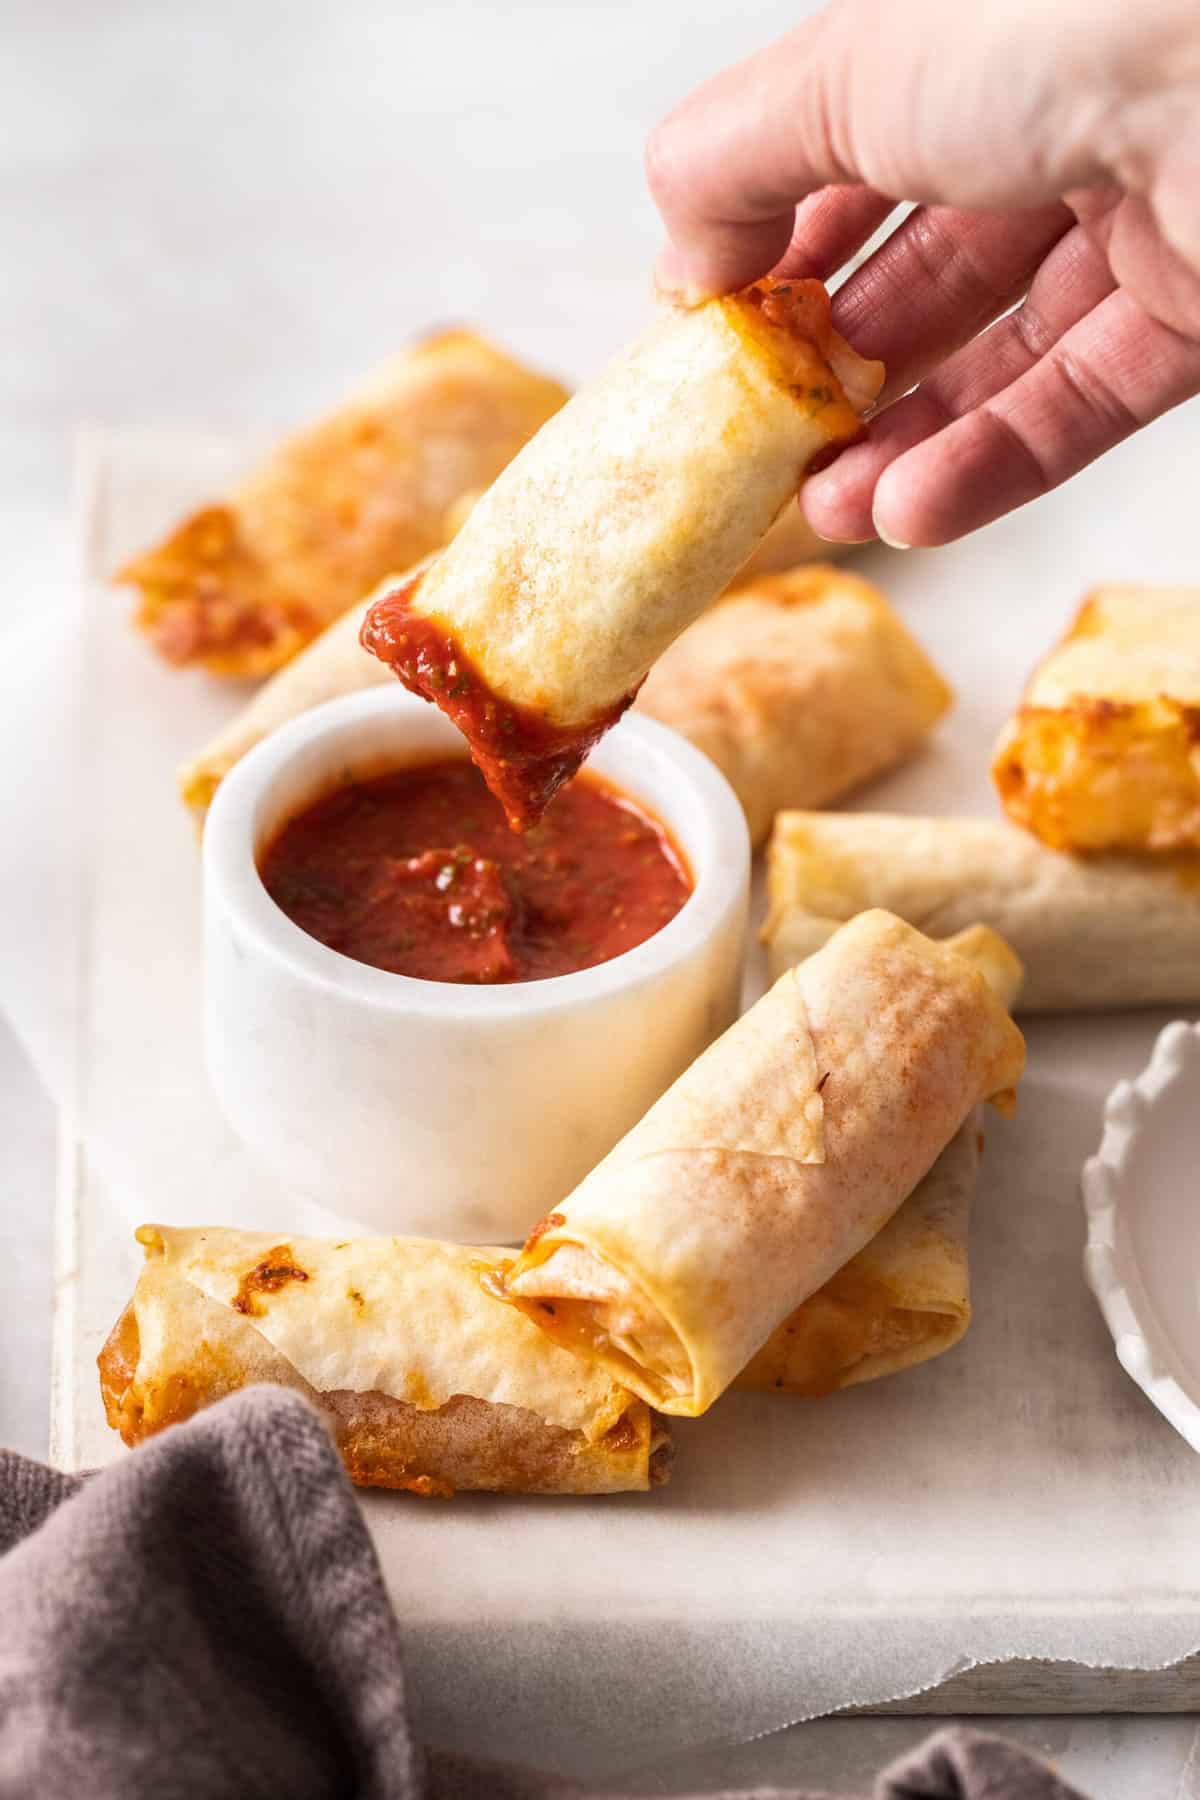 a hand dipping a homemade pizza roll into a bowl of pizza sauce.